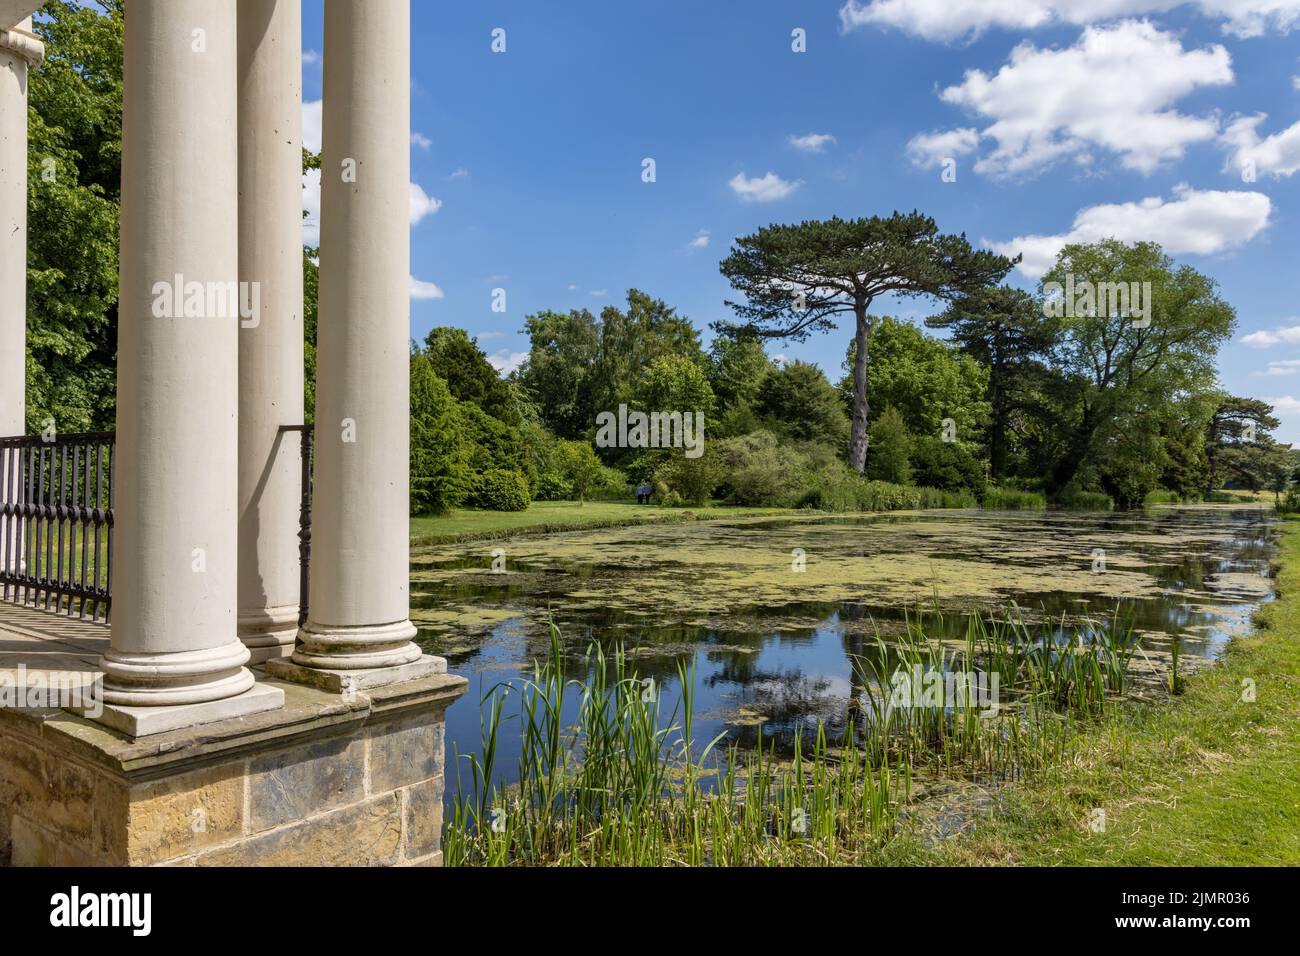 View of lake from Palladian Bridge at Scampston, designed by Capability Brown, Scampston Hall,  North Yorkshire, England. Stock Photo